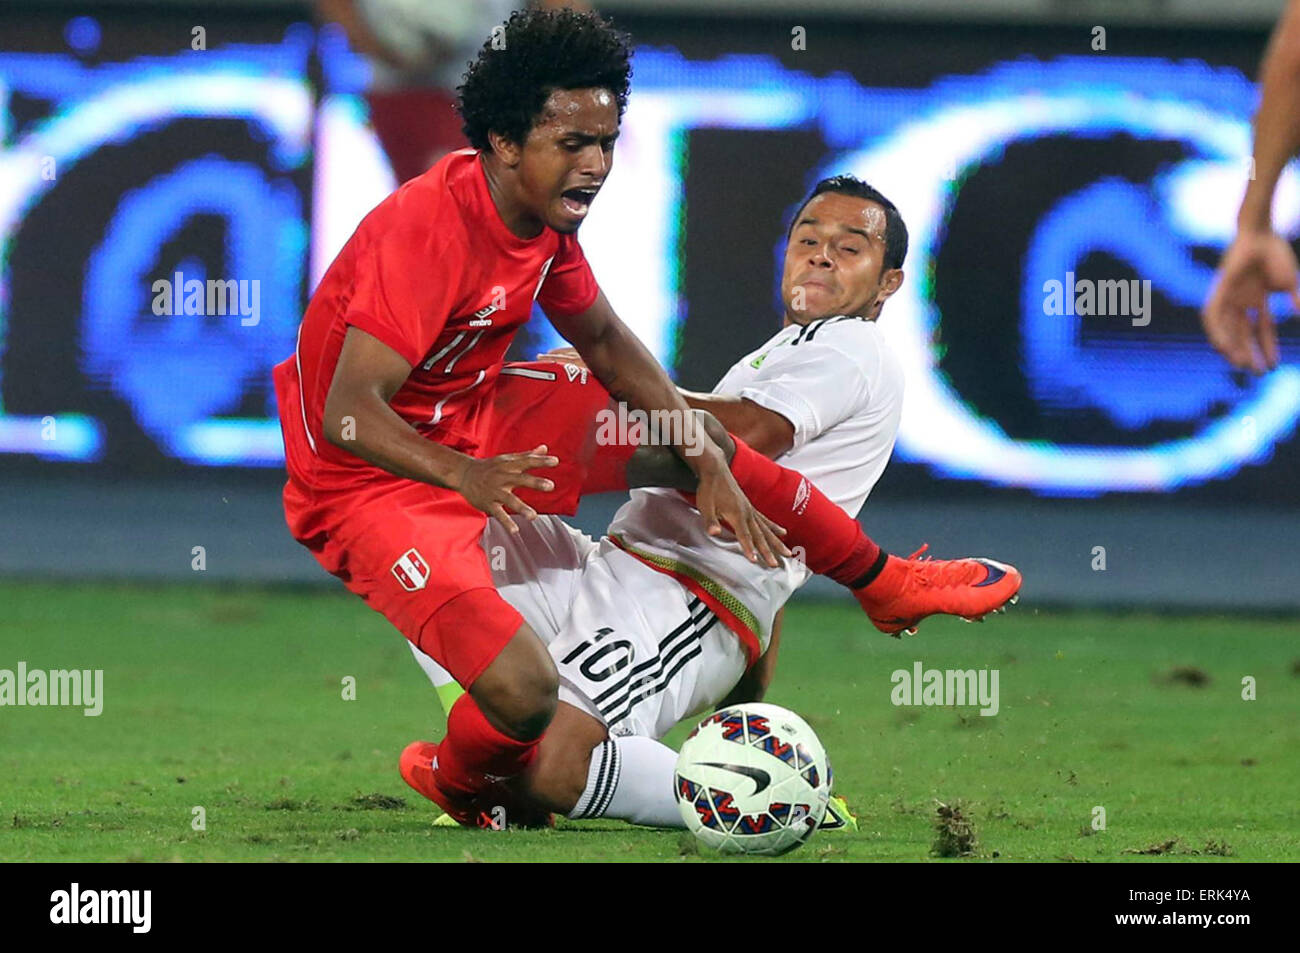 Lima, Peru. 3rd June, 2015. Peru's Yordy Reyna (L) vies with Mexico's Luis Montes during an international friendly soceer match between Mexico and Peru, in Lima, Peru, on June 3, 2015. Mexico and Peru played the match on Wednesday in preparation for the upcoming 2015 Copa America, which will be held from June 11 to July 4 in Chile. © Juan Carlos Guzman/Xinhua/Alamy Live News Stock Photo